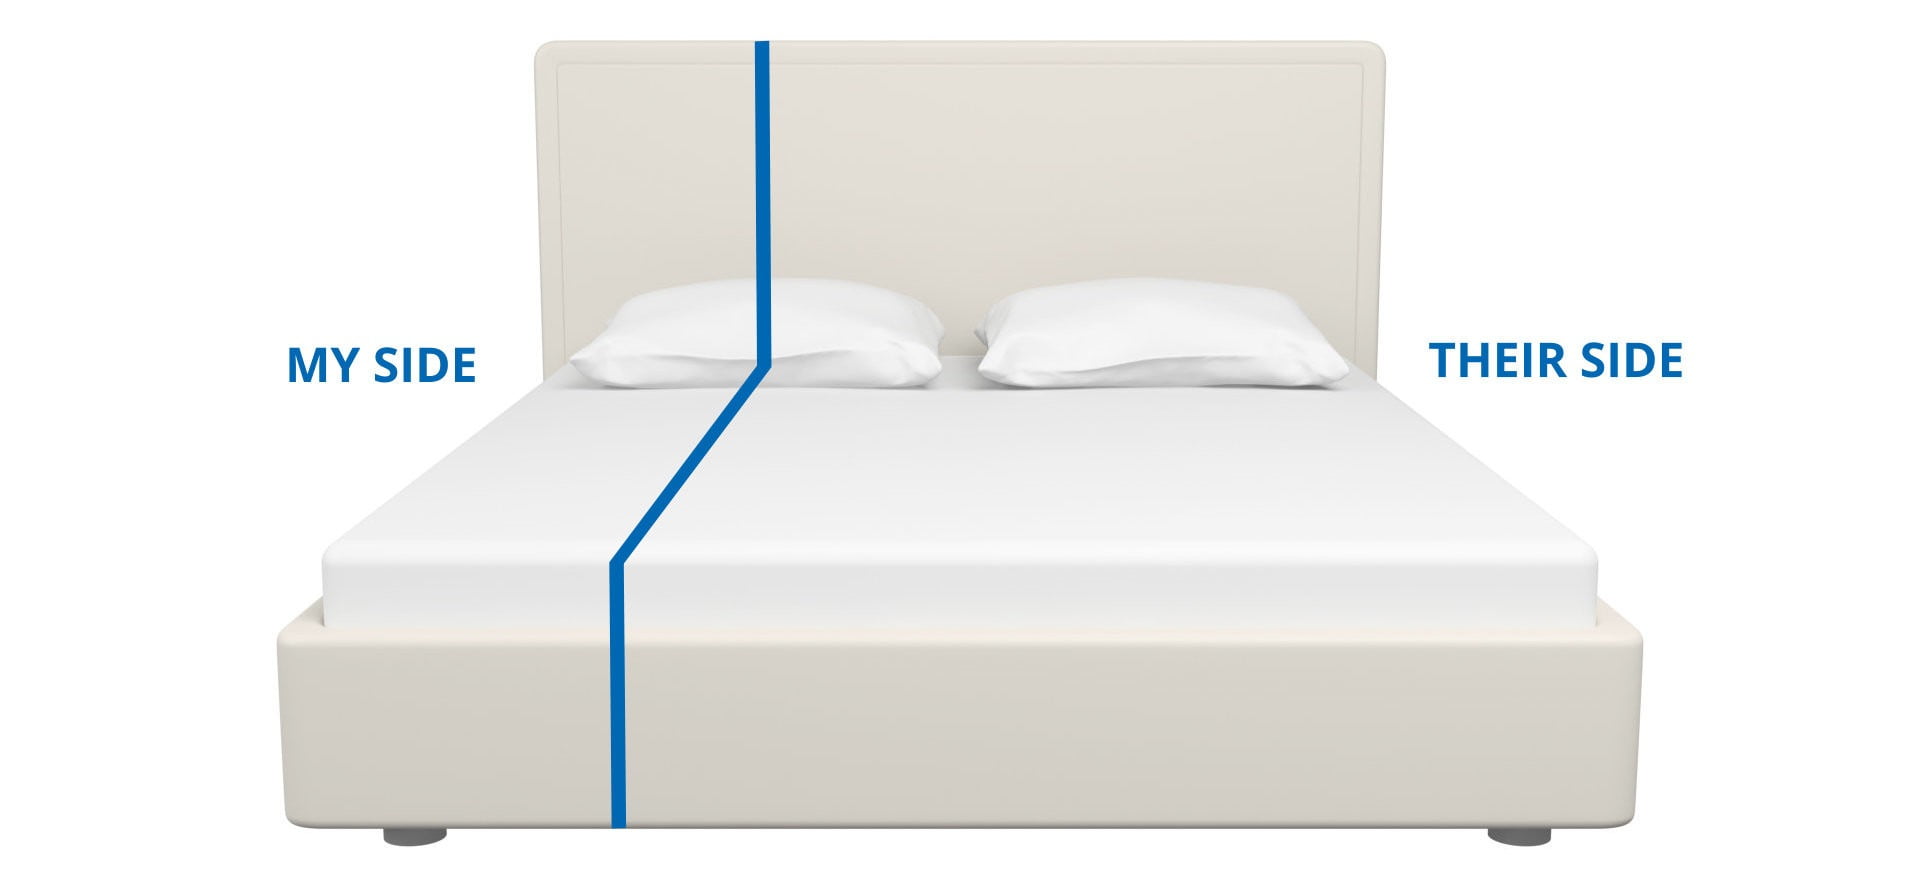 Bed Sizes Uk And Mattress Size, What Size Is 2 King Single Beds Put Together